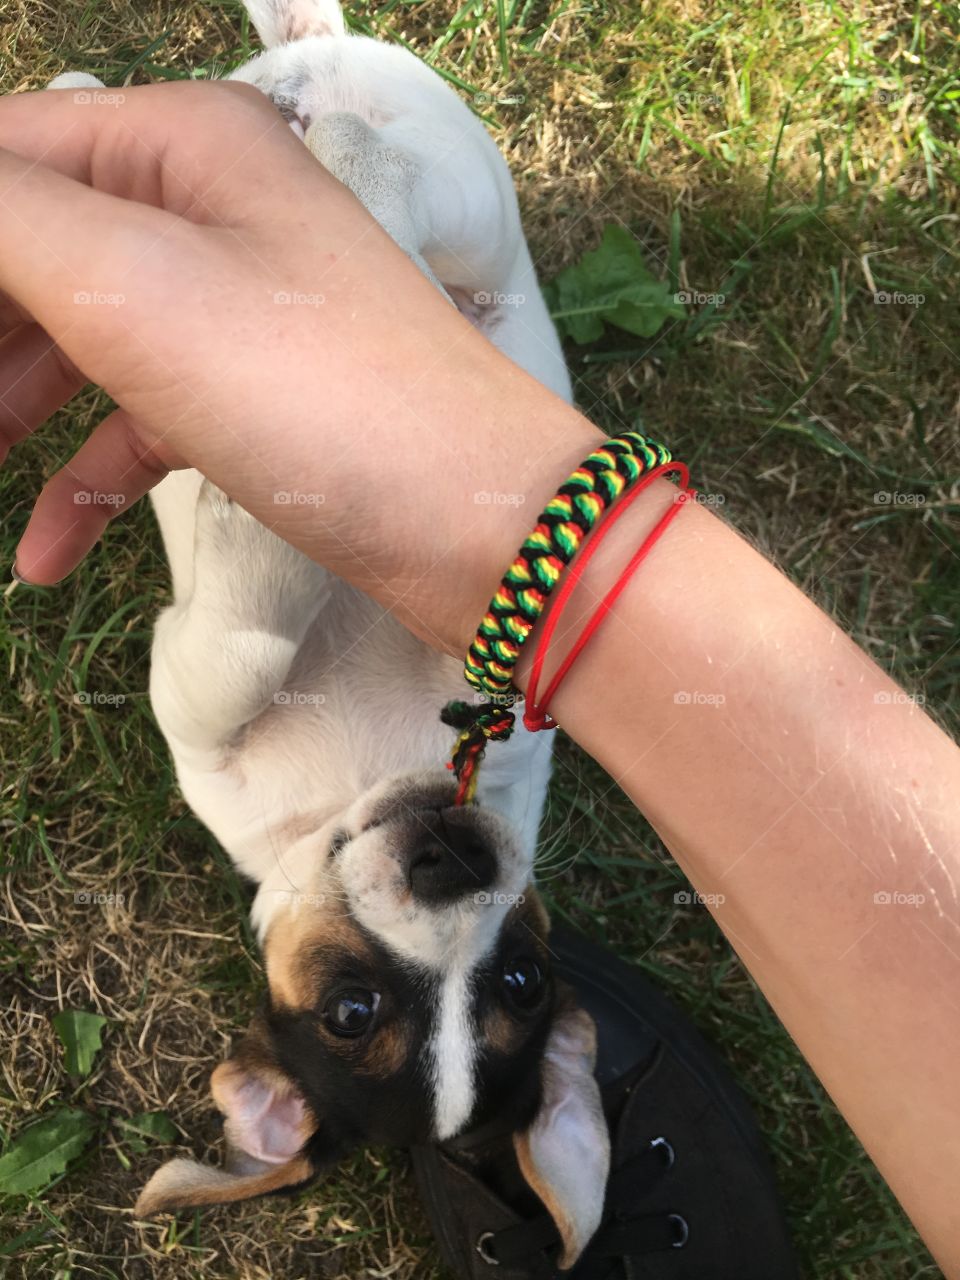 Chewing on my rasta bracelet. Why doggo, just why? Would you like a bracelet like this too?